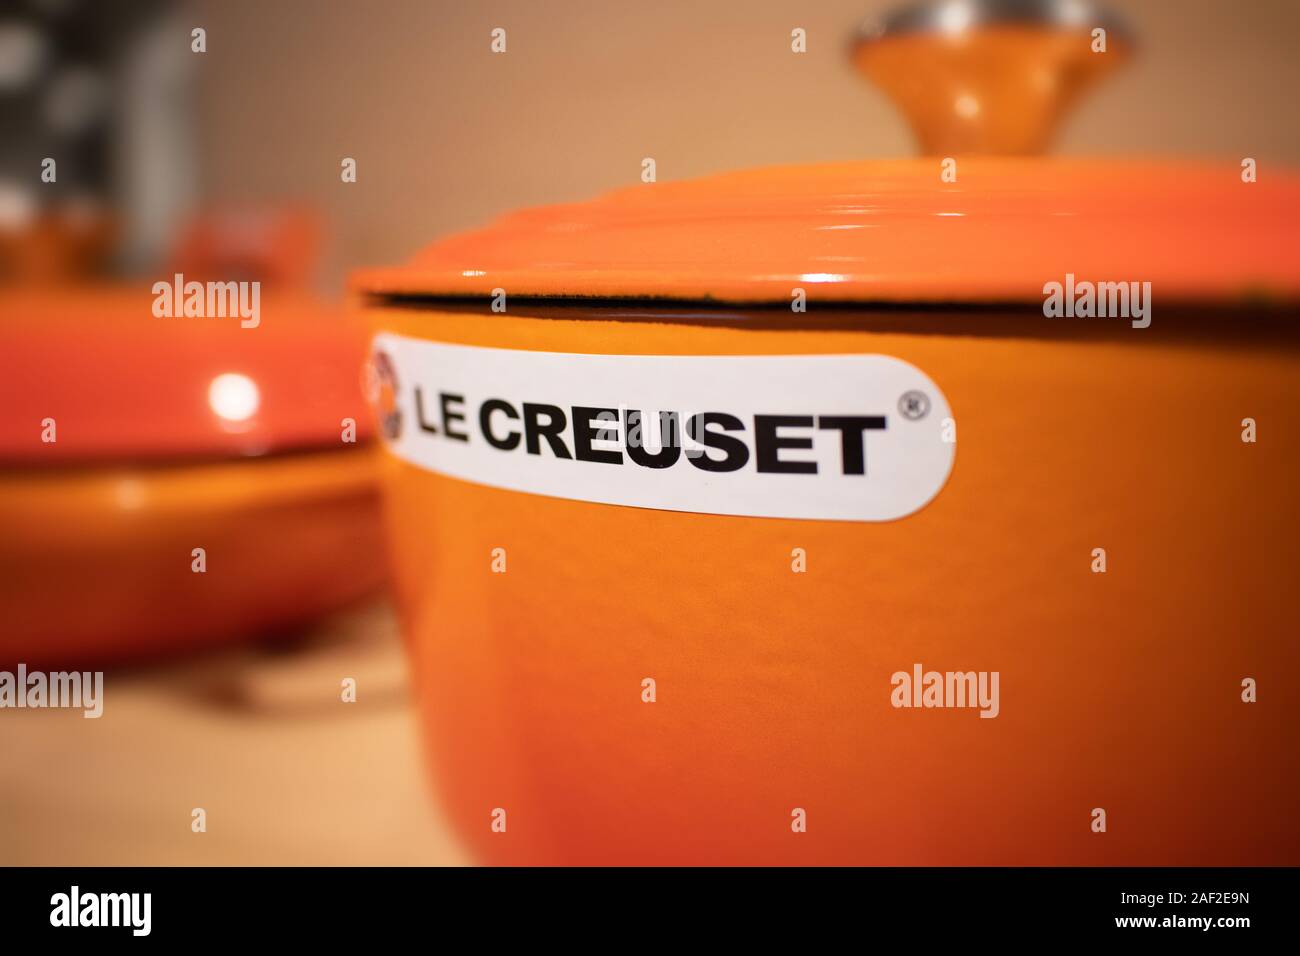 https://c8.alamy.com/comp/2AF2E9N/le-creuset-casserole-dish-in-the-famous-orange-colour-its-a-premium-french-cookware-manufacturer-known-for-its-colorfully-enameled-pots-and-pans-2AF2E9N.jpg